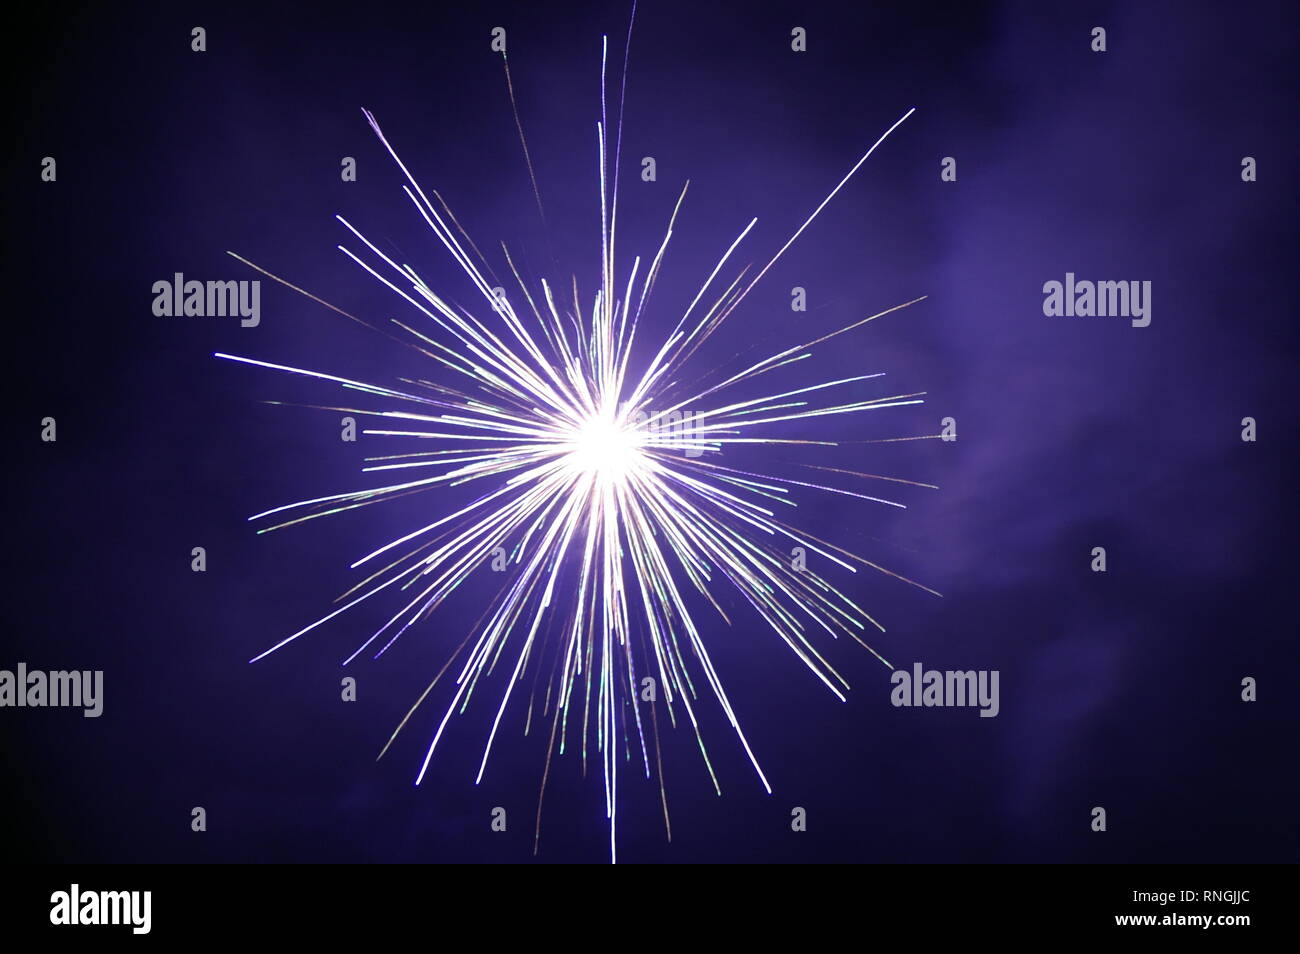 Bright white fireworks exploding in the night sky Stock Photo